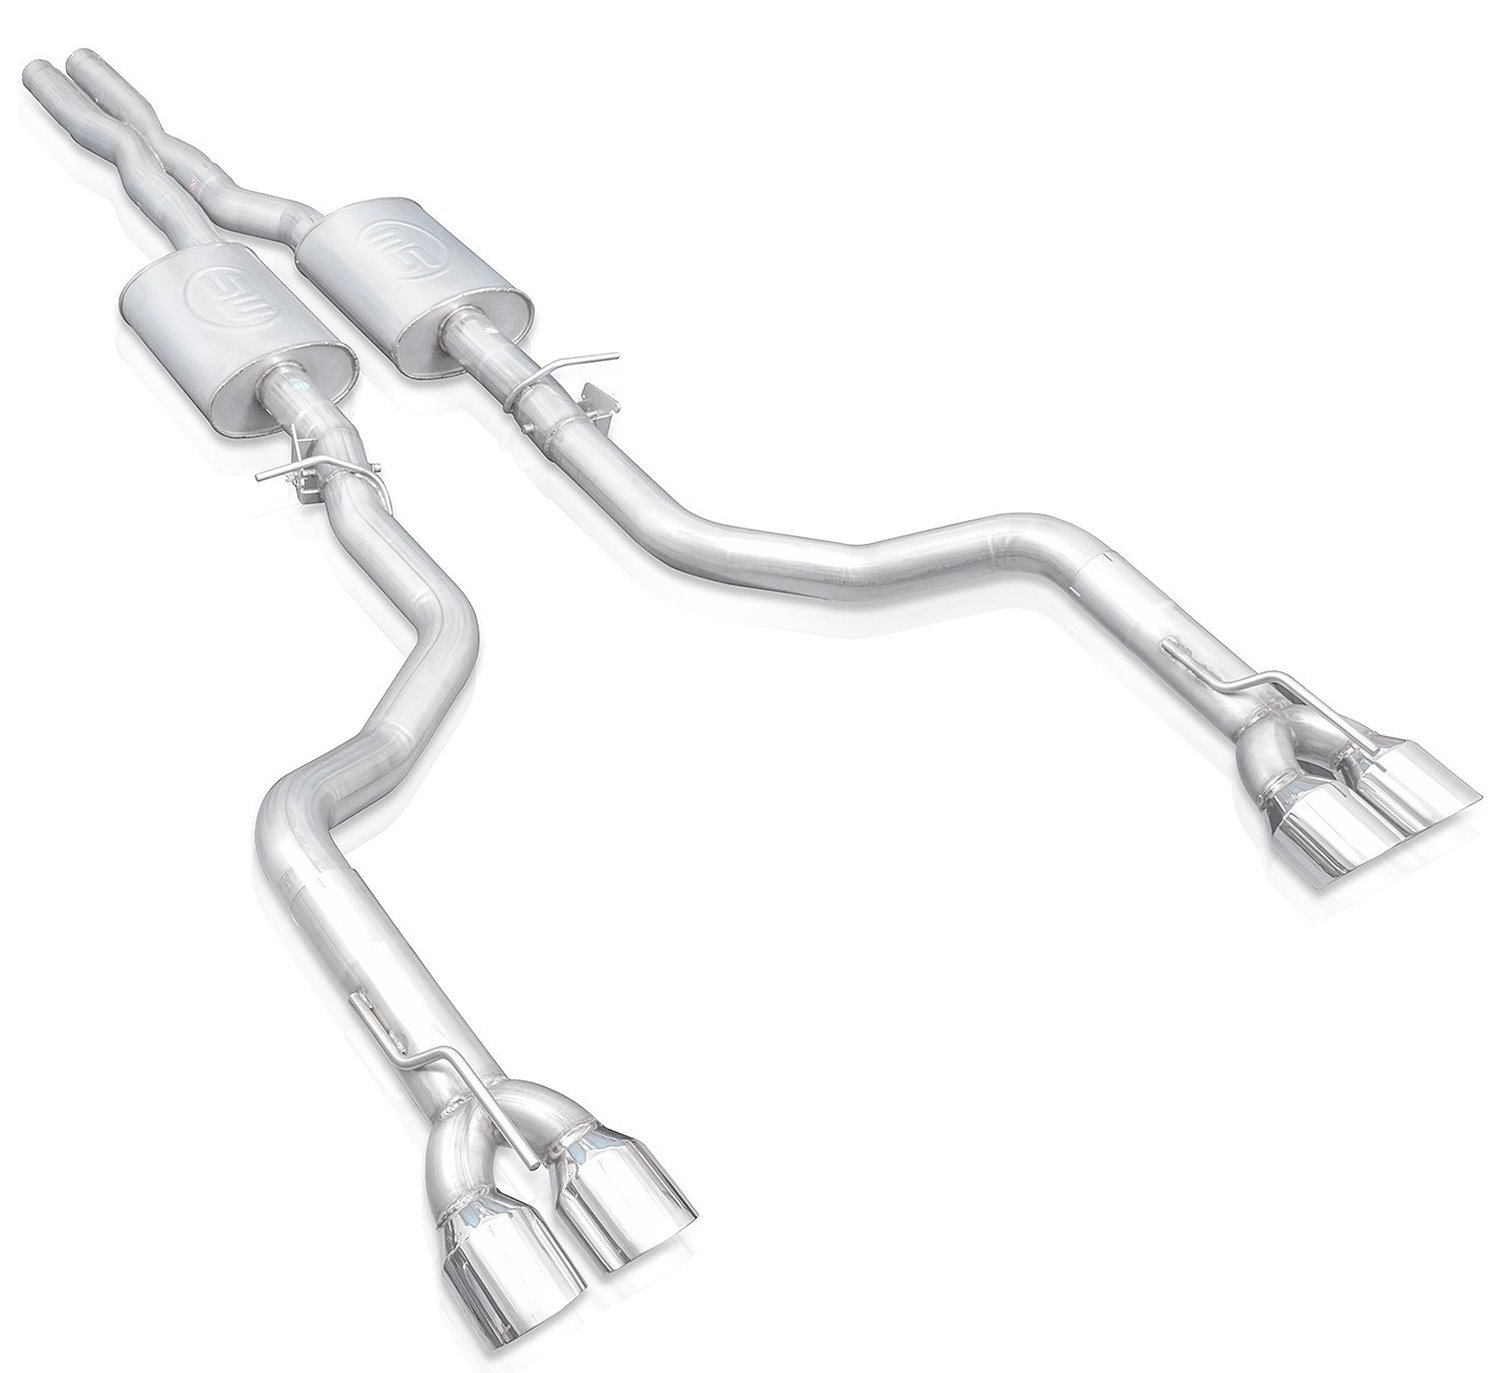 Legend Series Cat-Back Exhaust System with X-Pipe Dodge Challenger 6.2L, 6.4L Hemi - Polished Tips - Growl/Rumble Sound